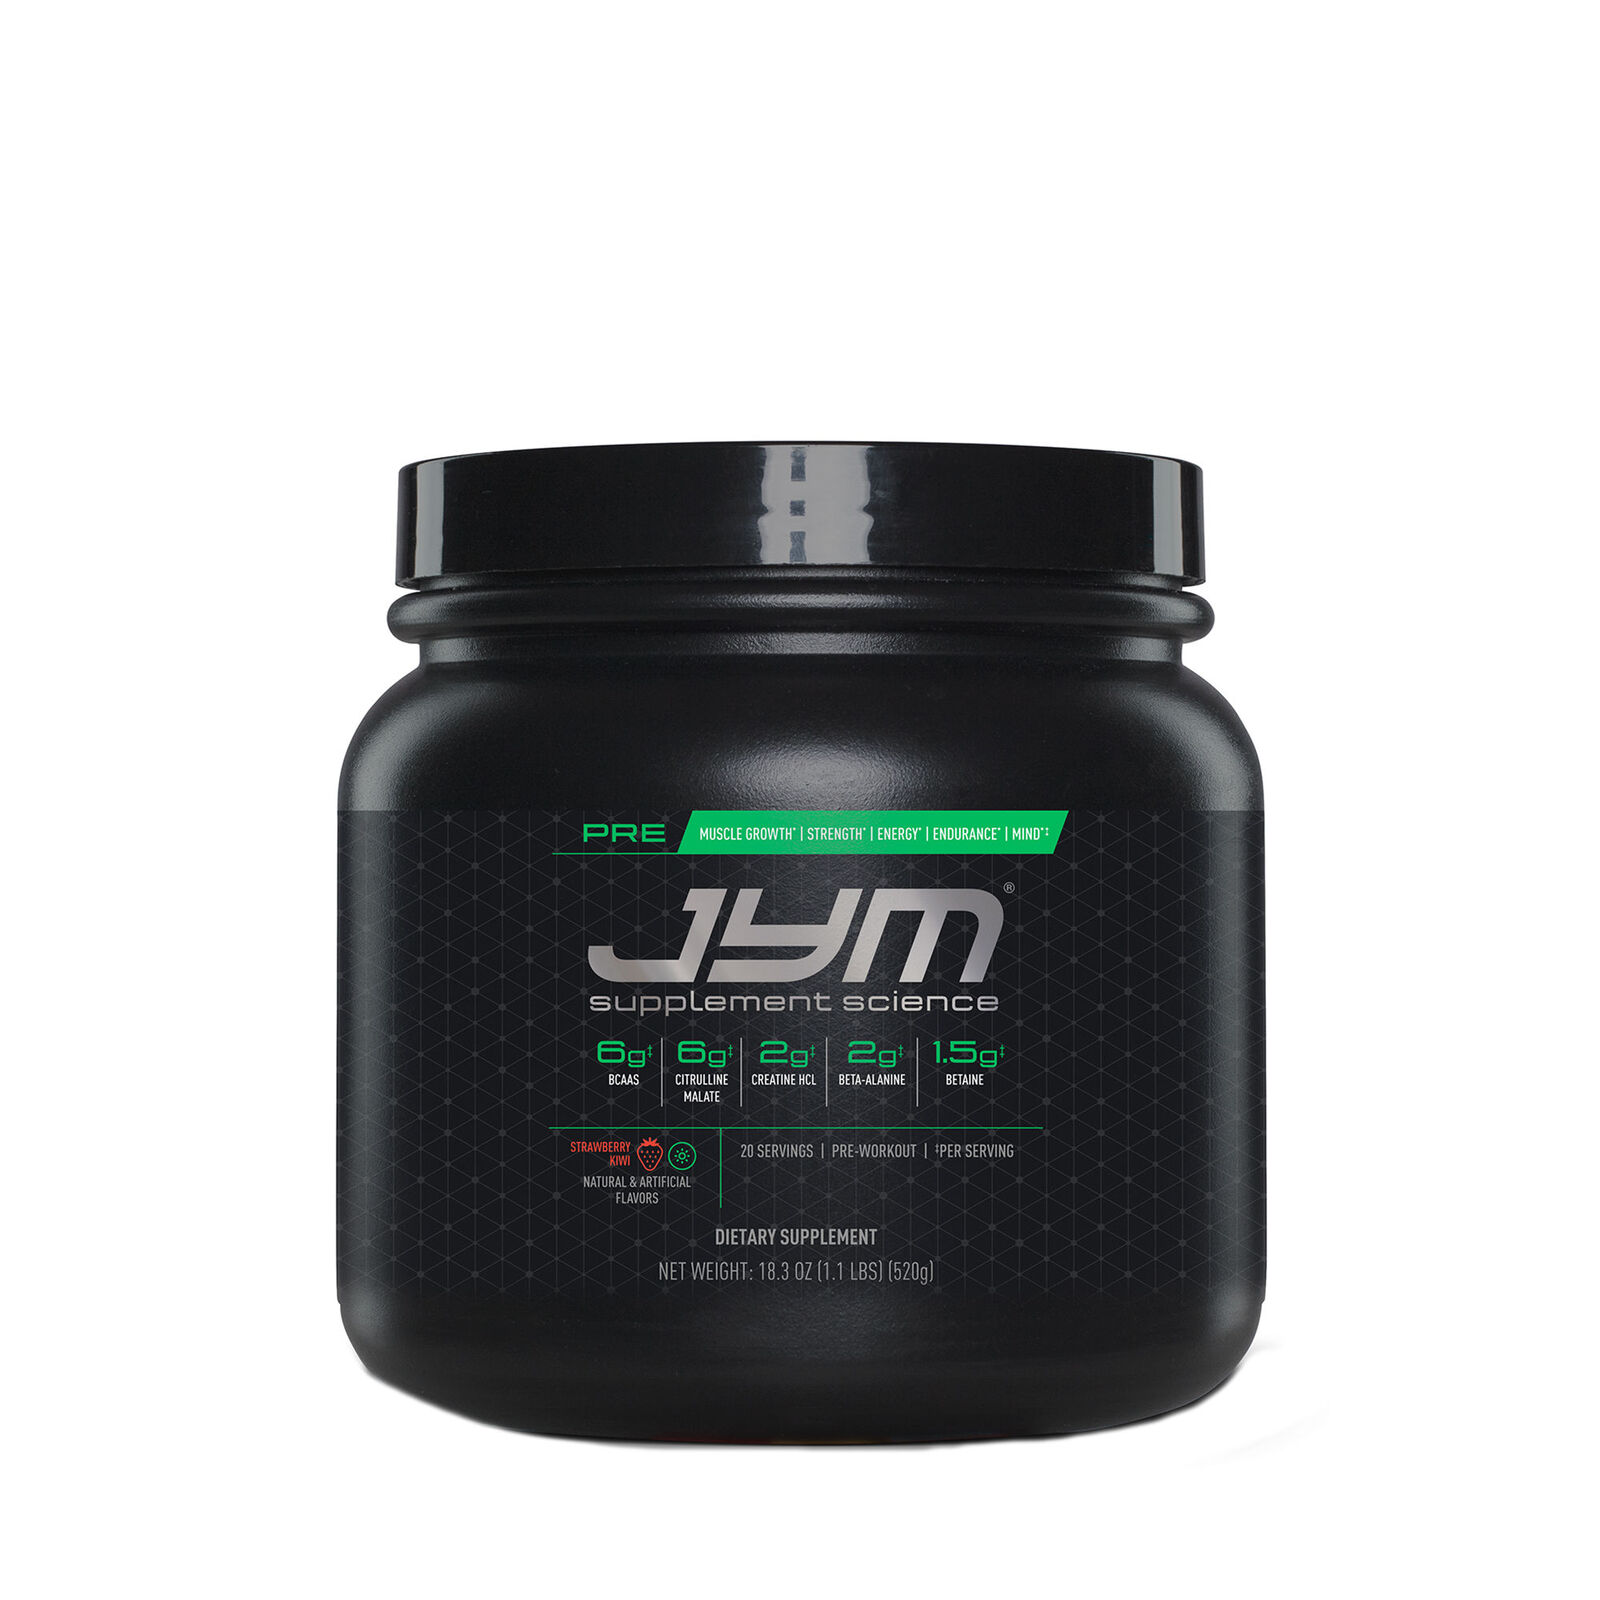 15 Minute Jym Pre Workout Ingredients with Comfort Workout Clothes